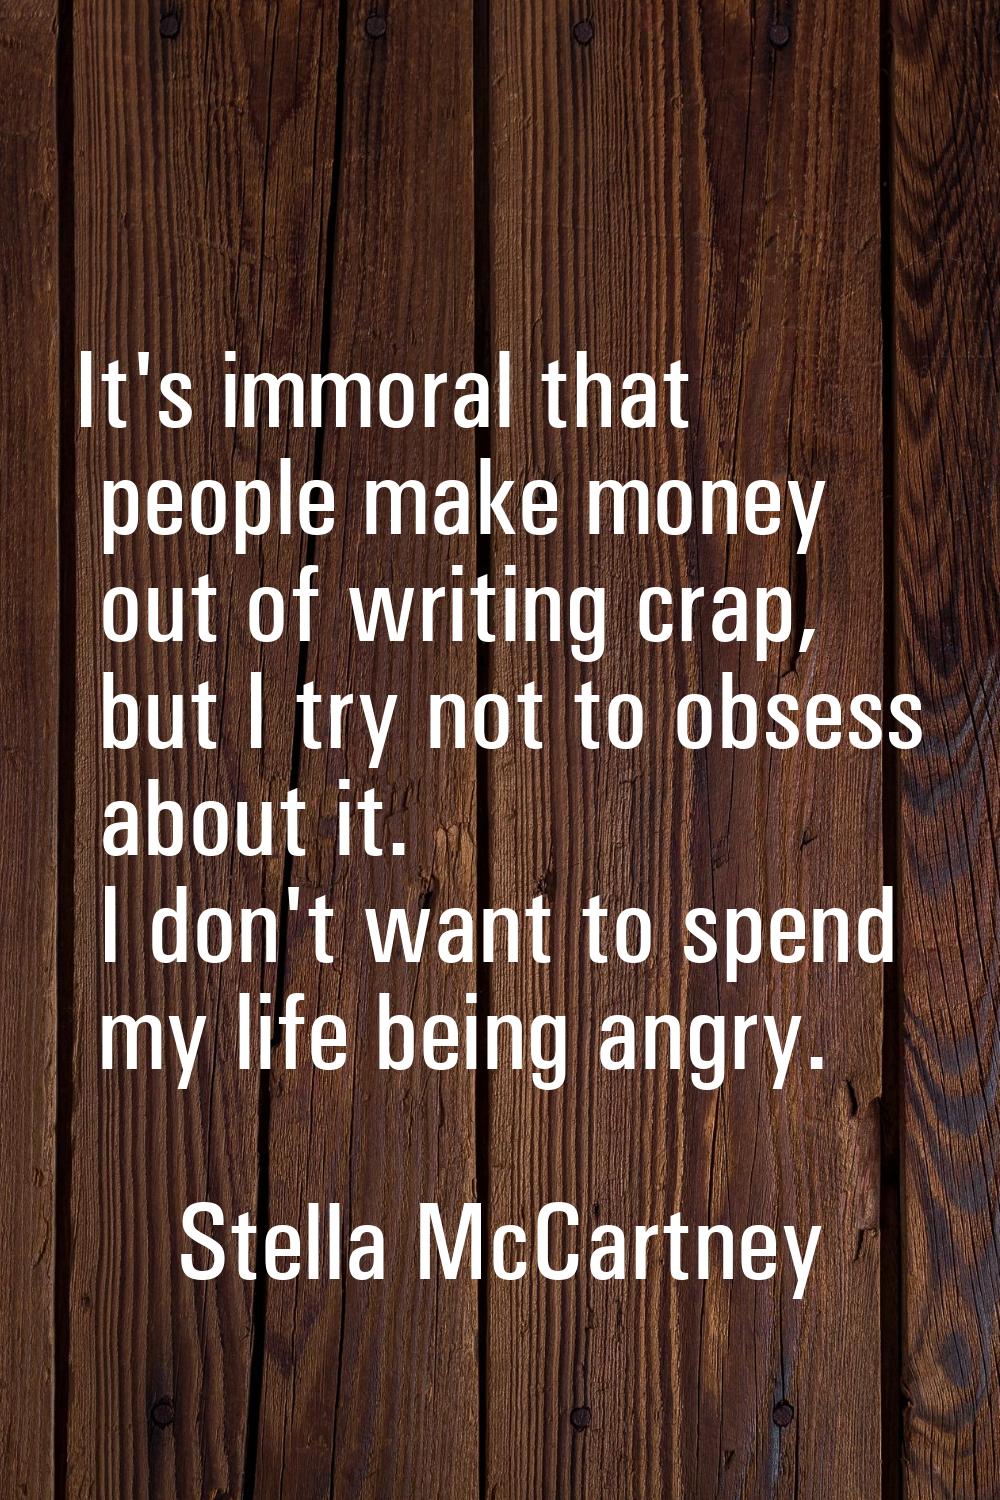 It's immoral that people make money out of writing crap, but I try not to obsess about it. I don't 